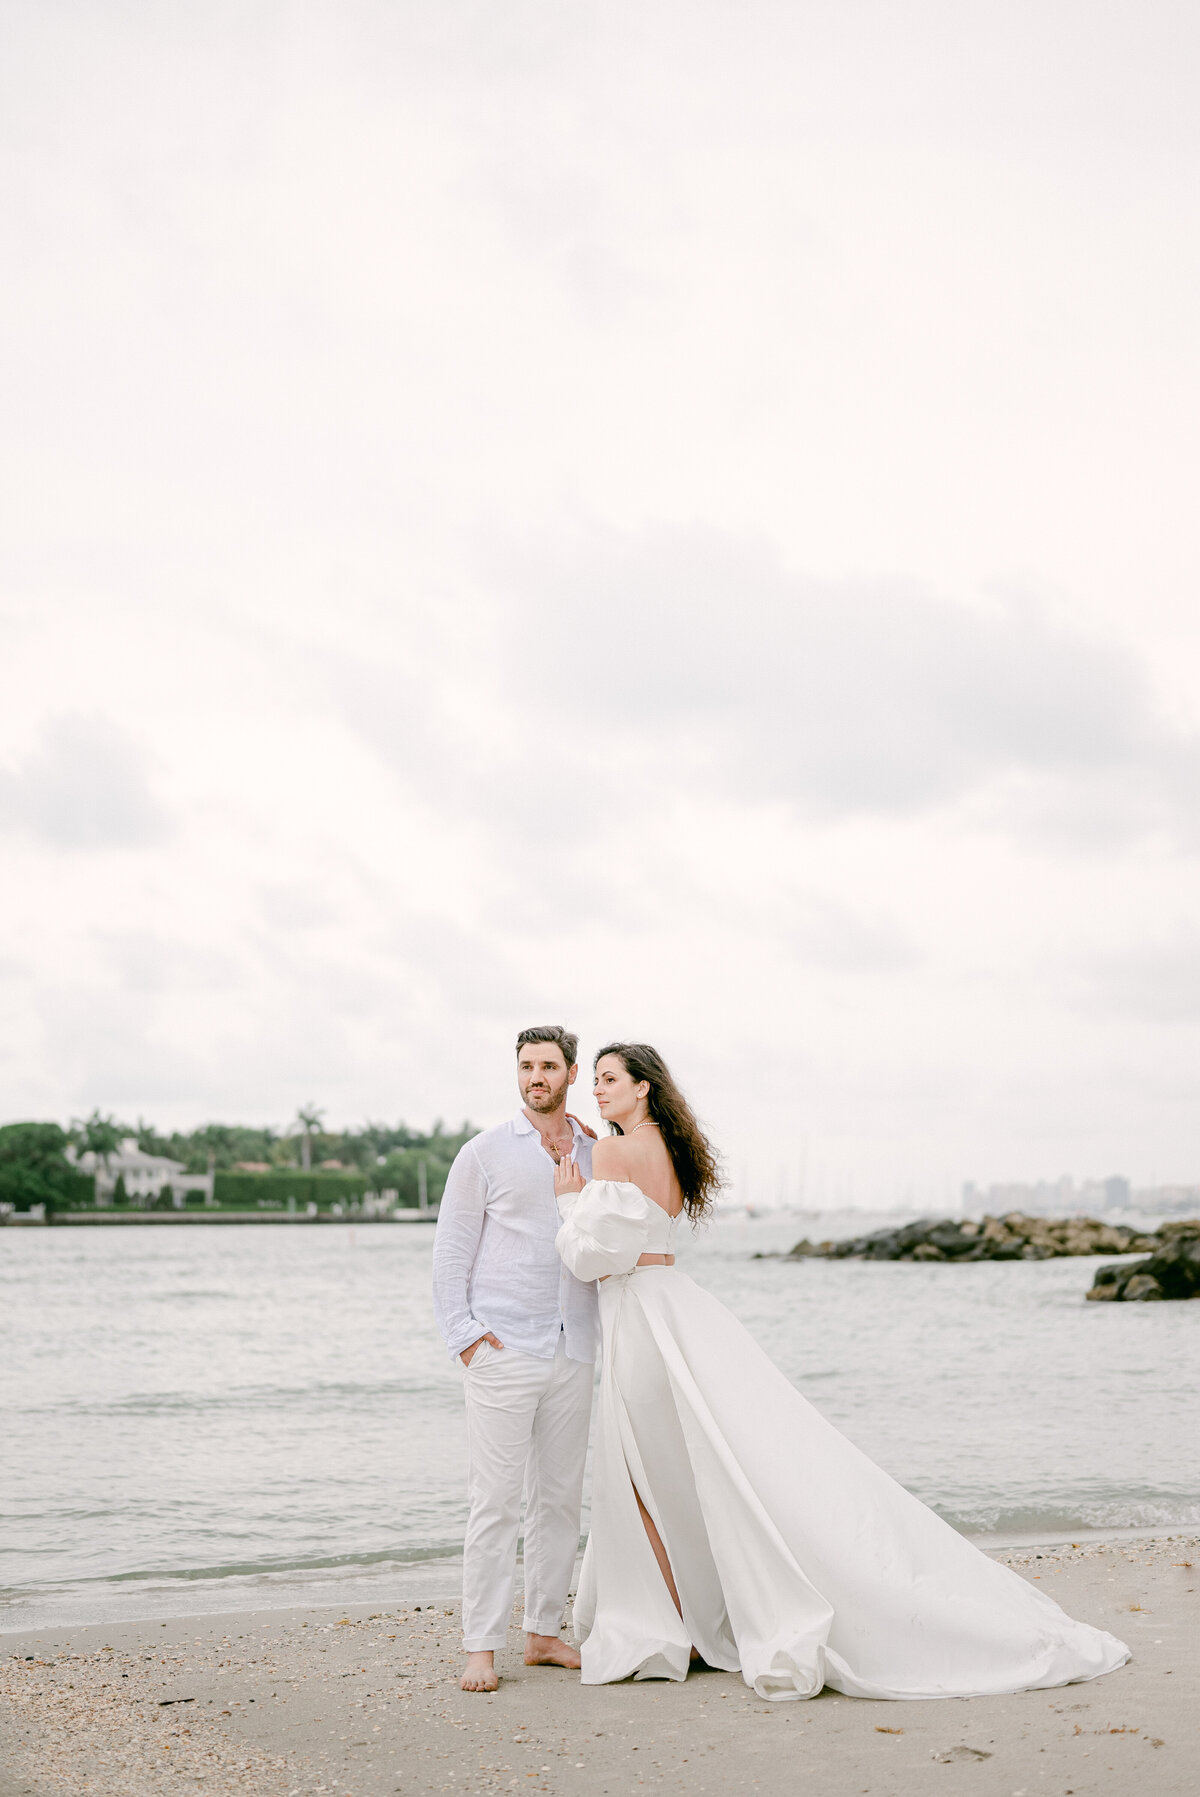 West Palm Beach session with bride and groom on the beach looking at the same direction